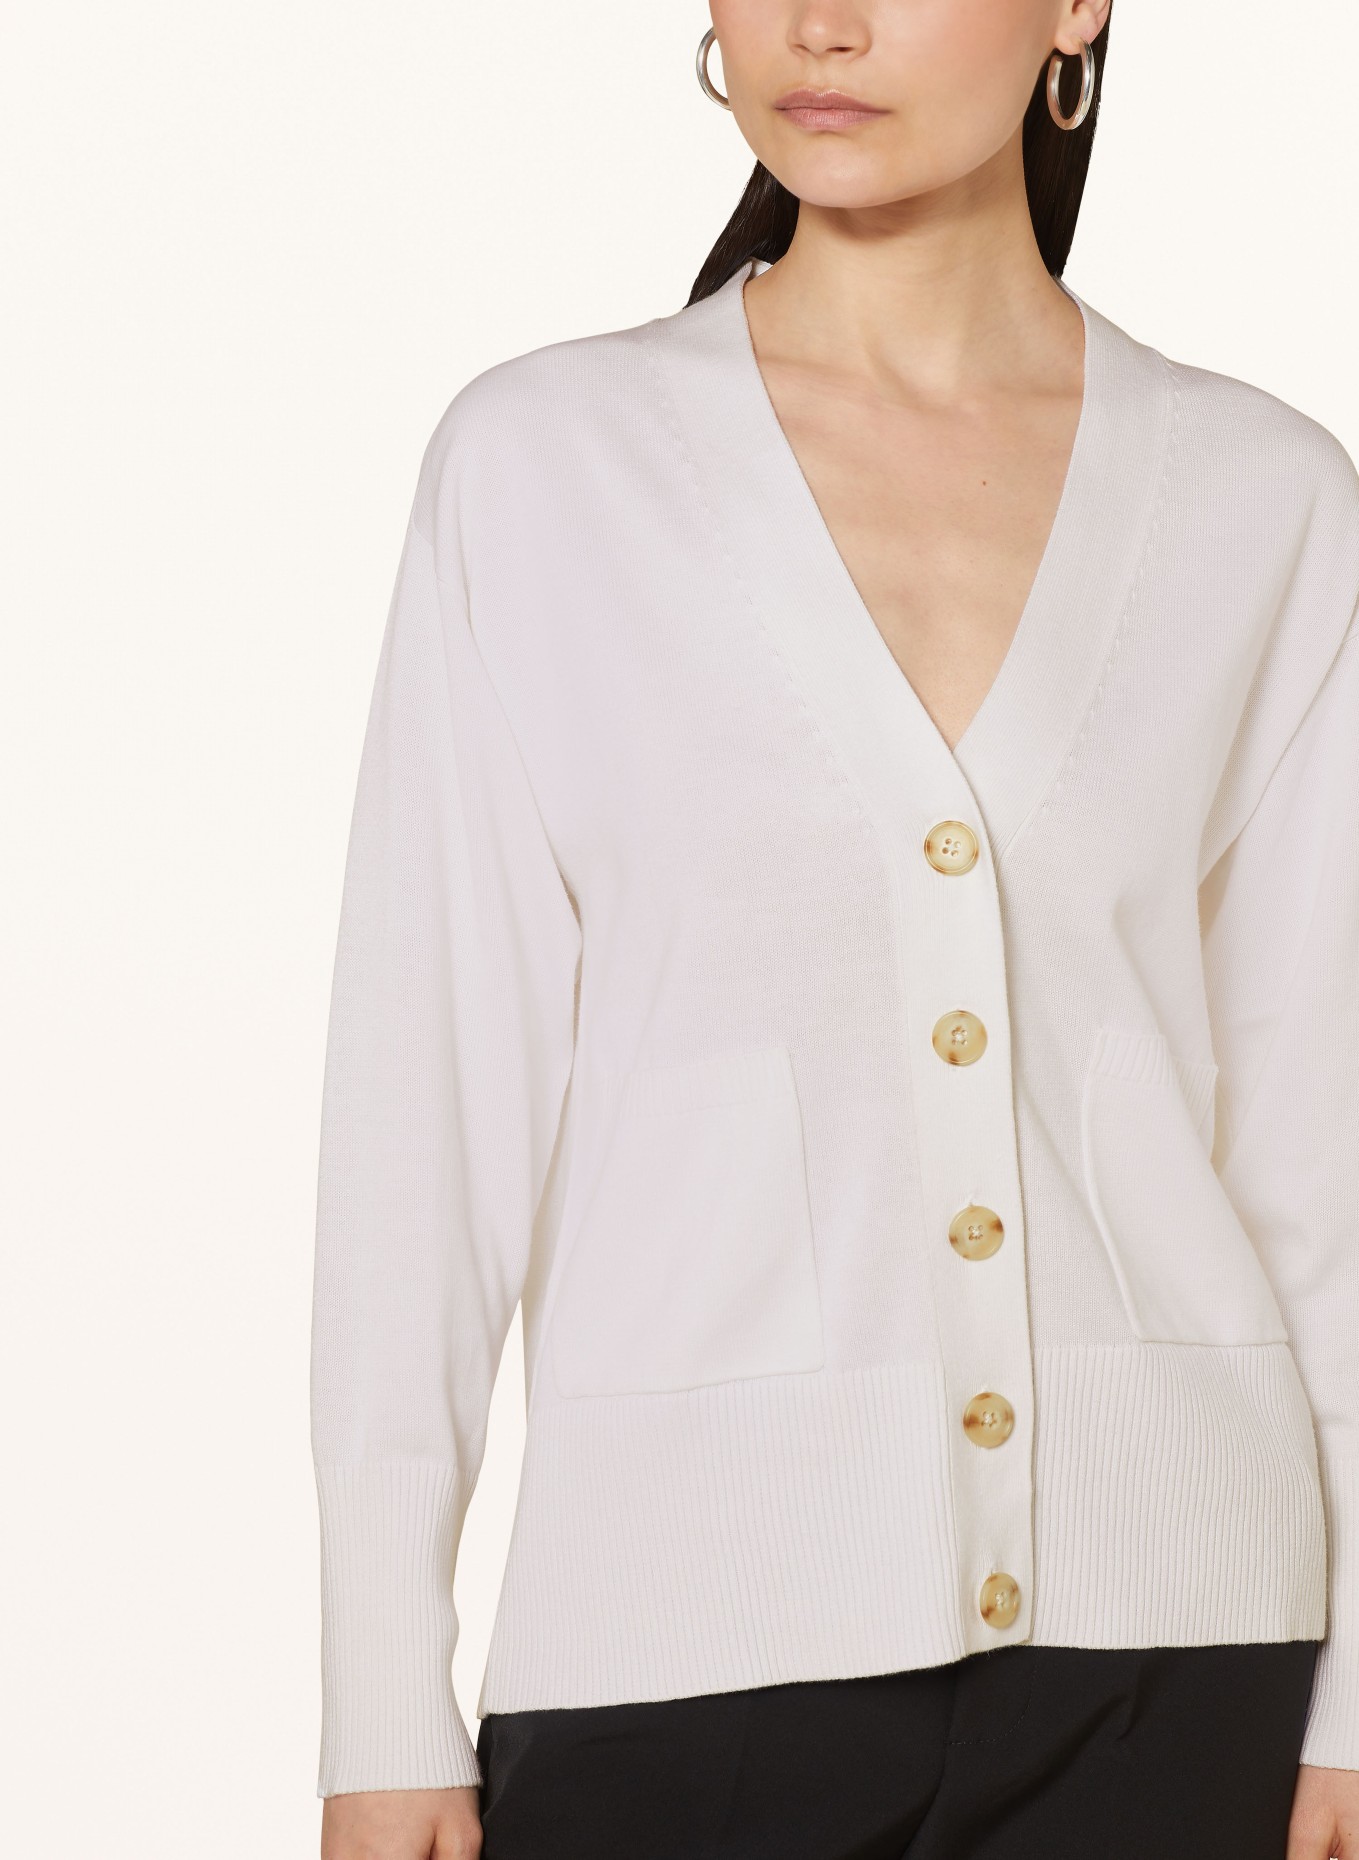 REPEAT Cardigan made of cashmere and silk, Color: WHITE (Image 4)